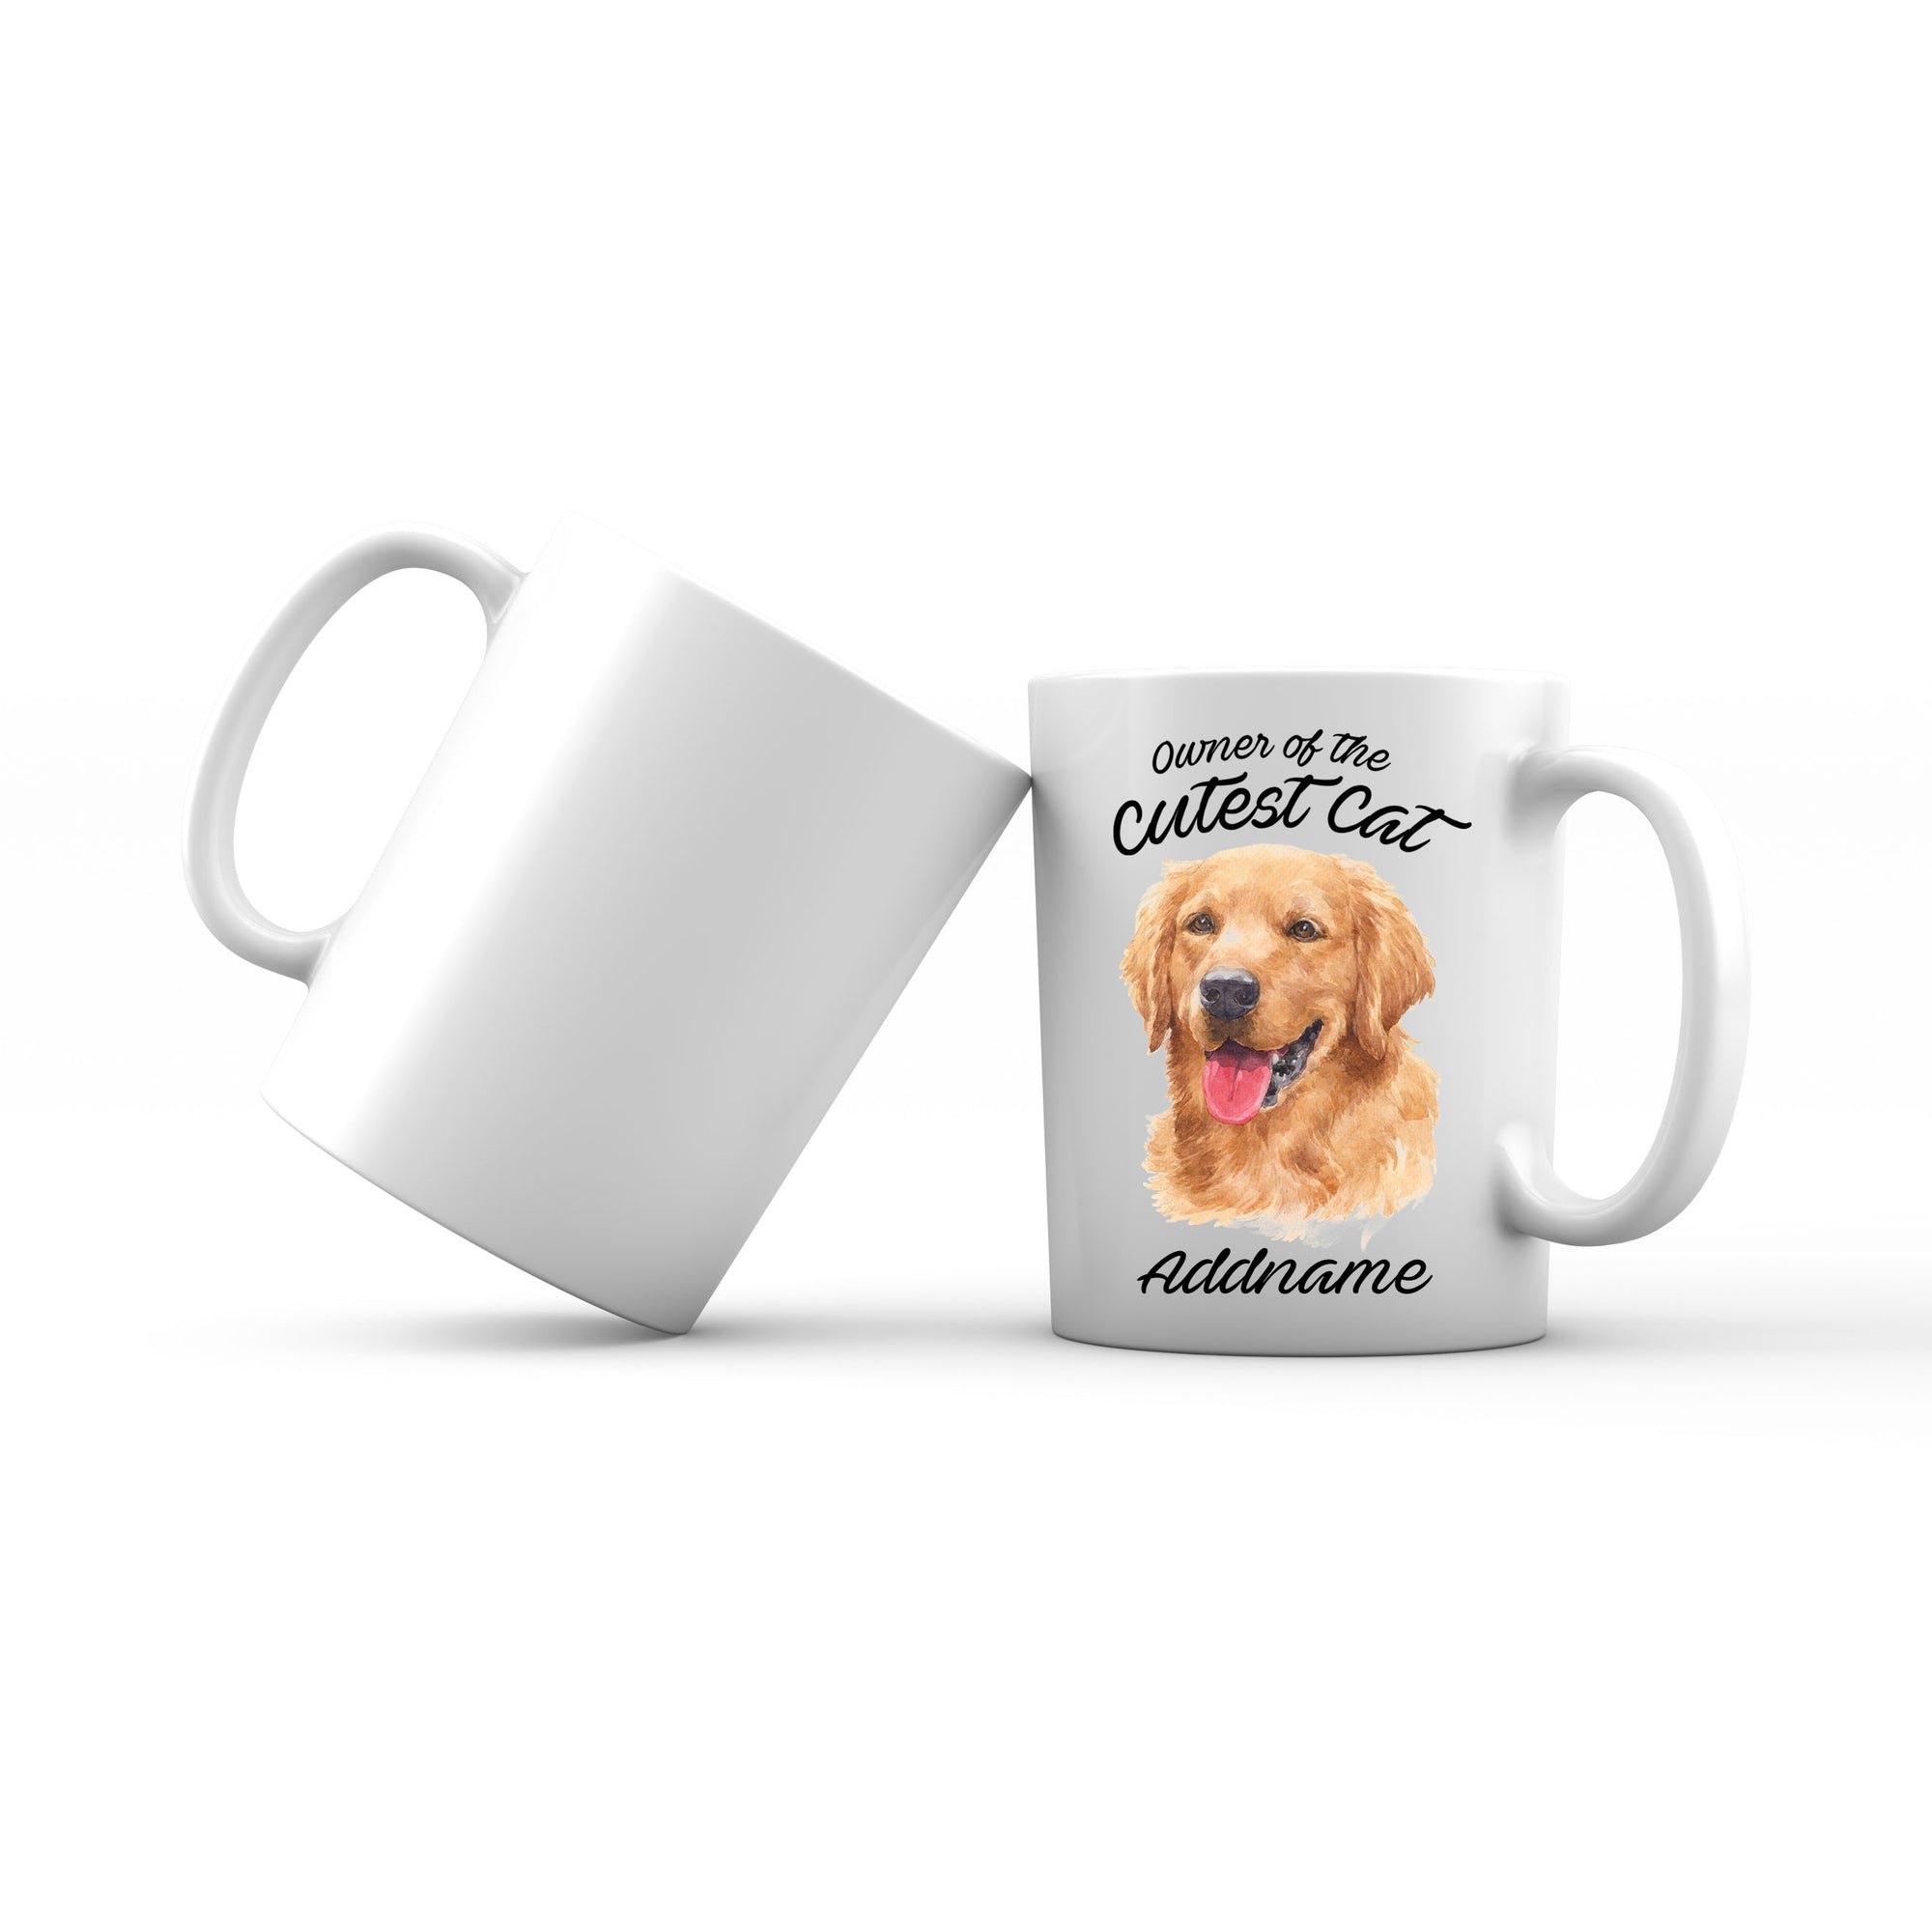 Watercolor Dog Owner Of The Cutest Dog Golden Retriever Addname Mug